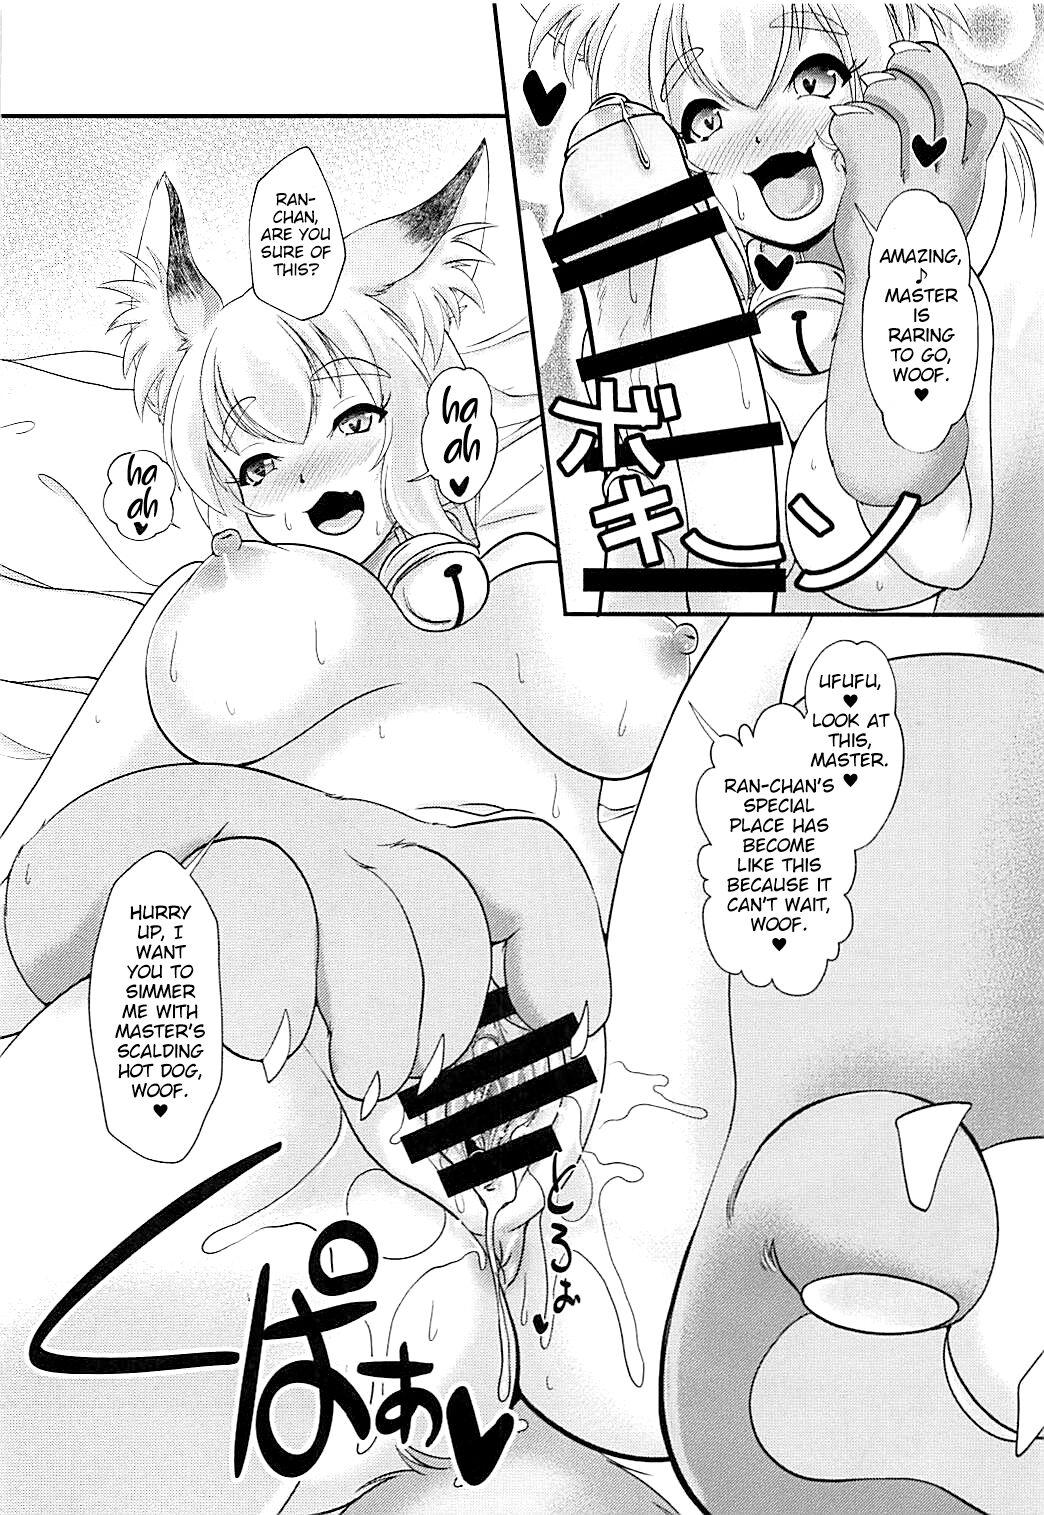 Mexico Rental Fox - Touhou project Facial - Page 7